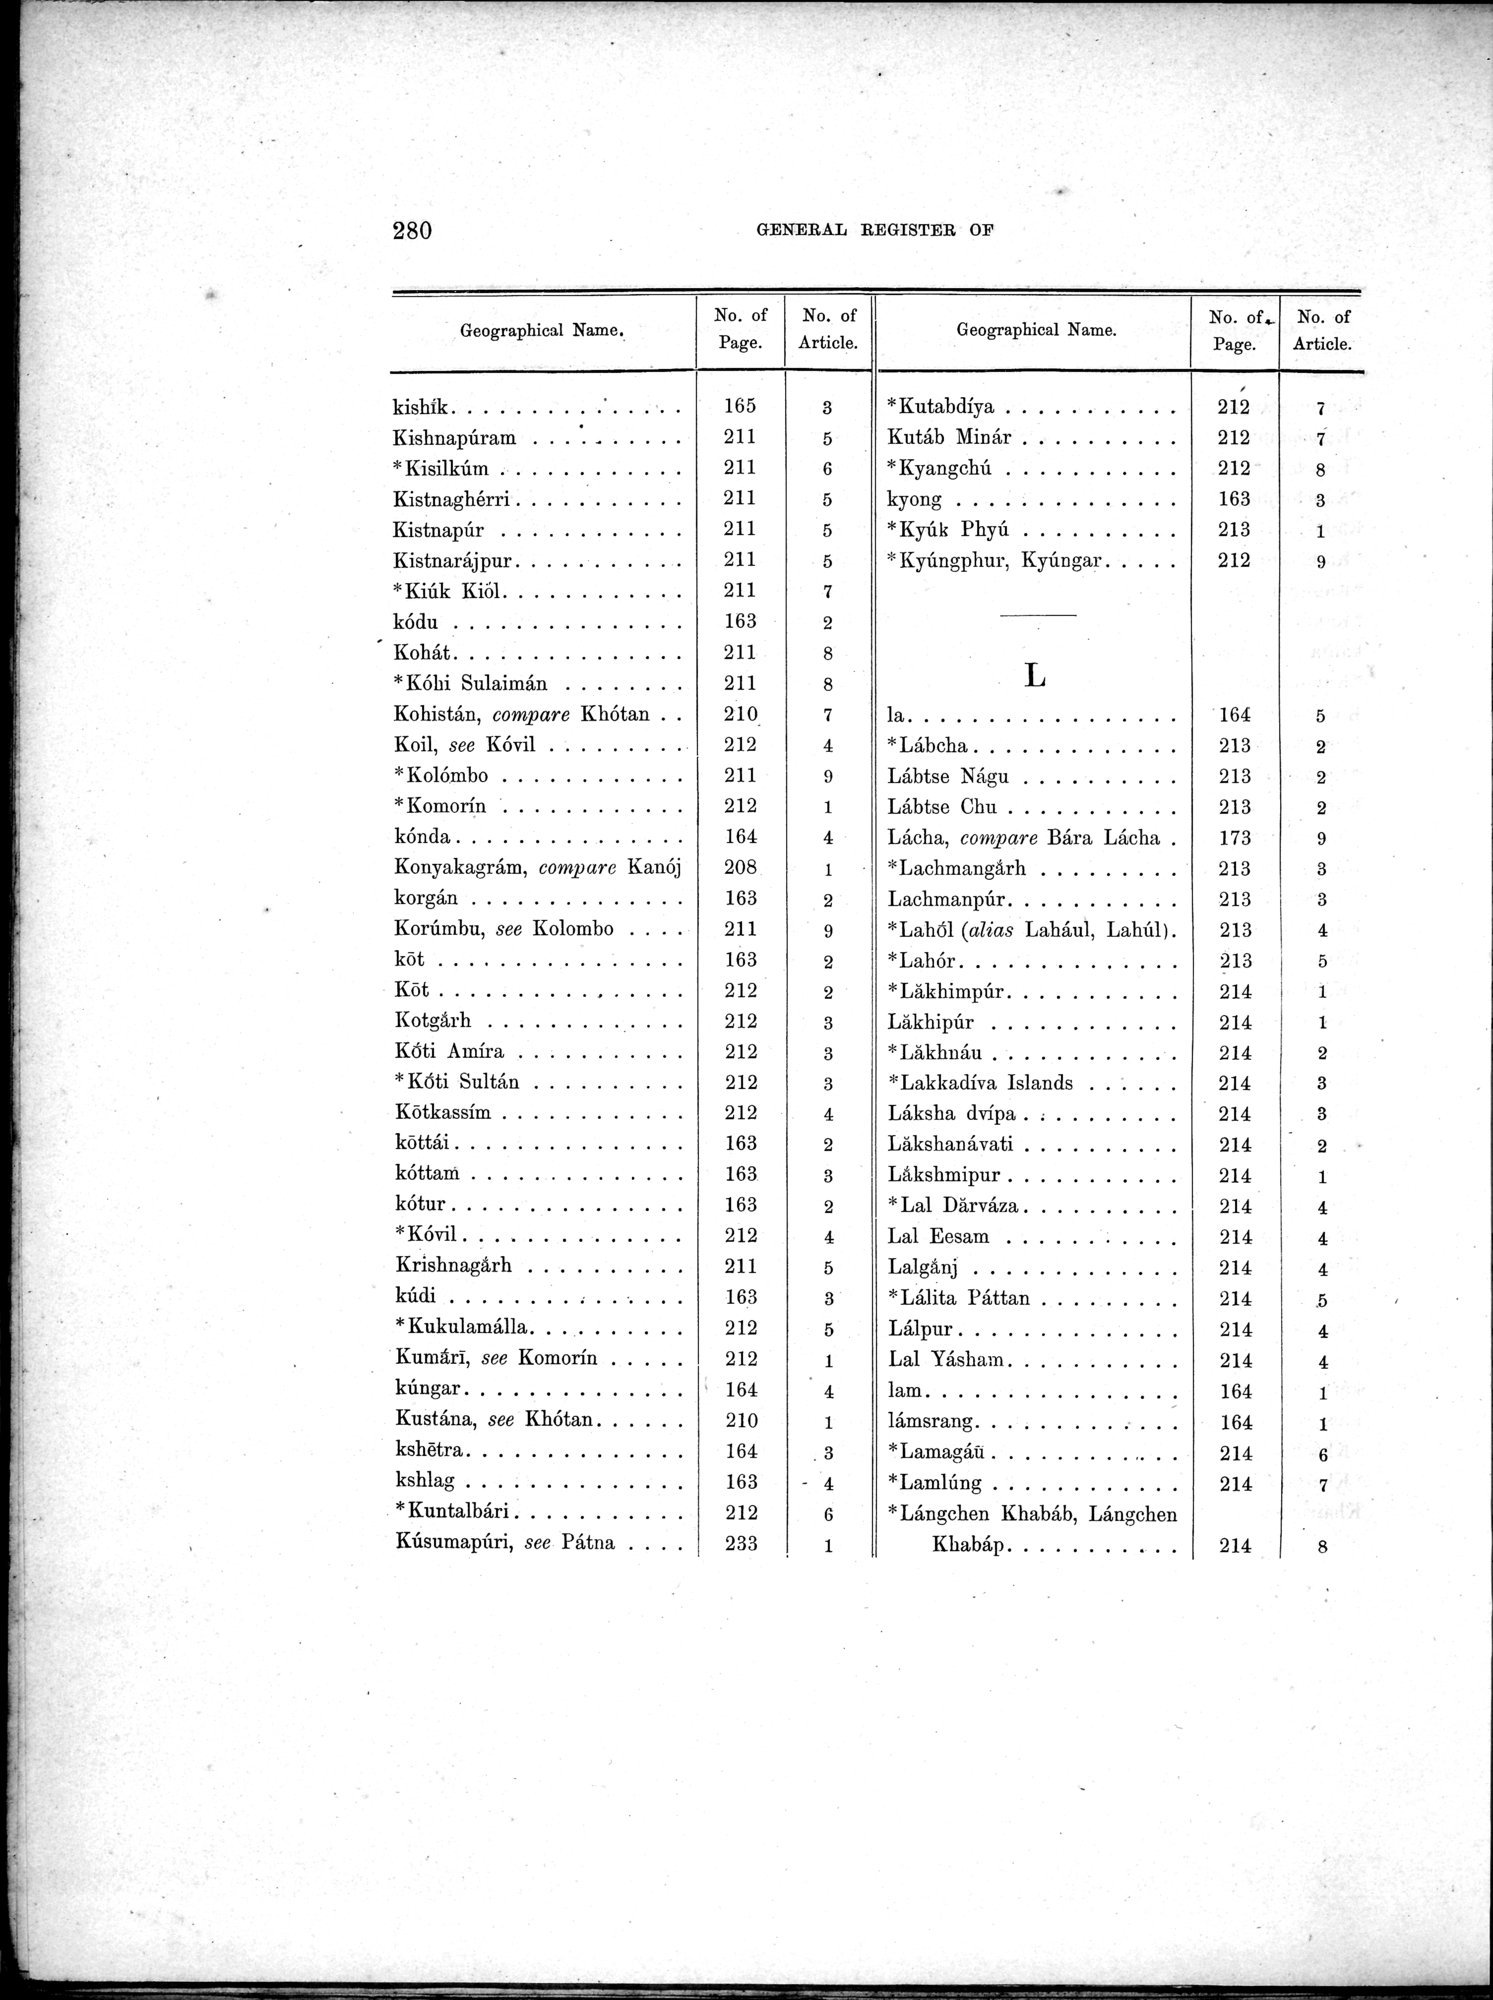 Results of a Scientific Mission to India and High Asia : vol.3 / Page 312 (Grayscale High Resolution Image)